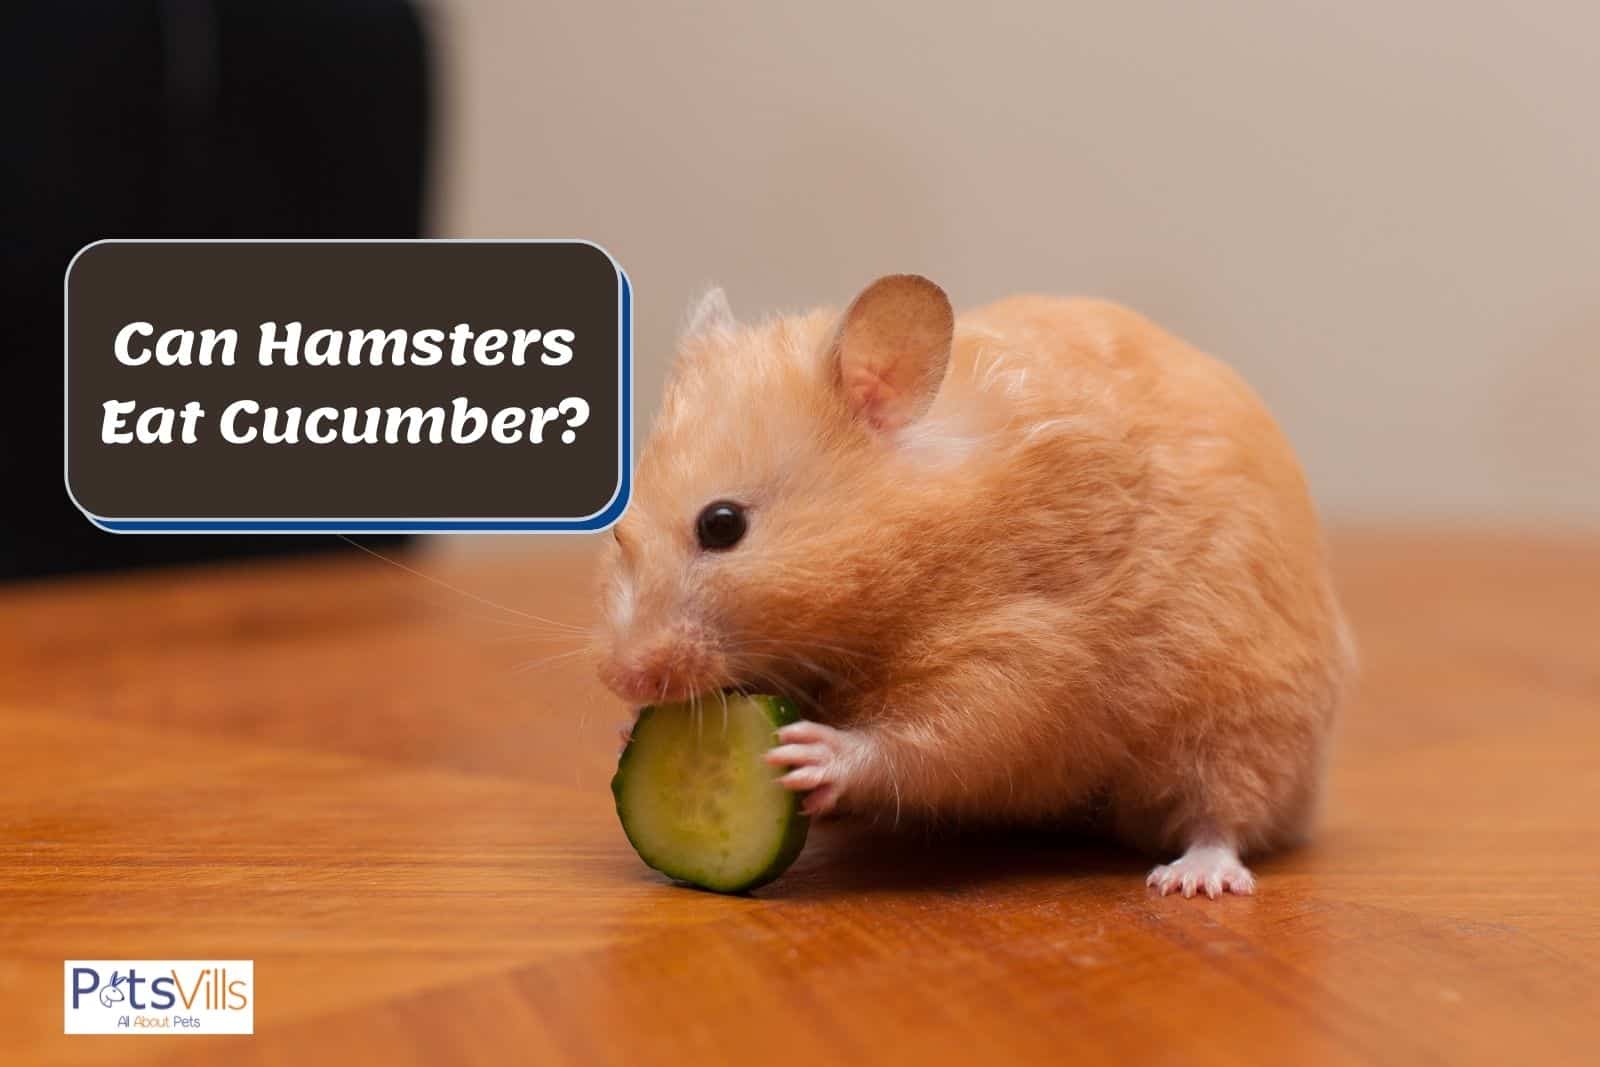 a hamster trying to eat cucumber, can hamsters eat cucumber